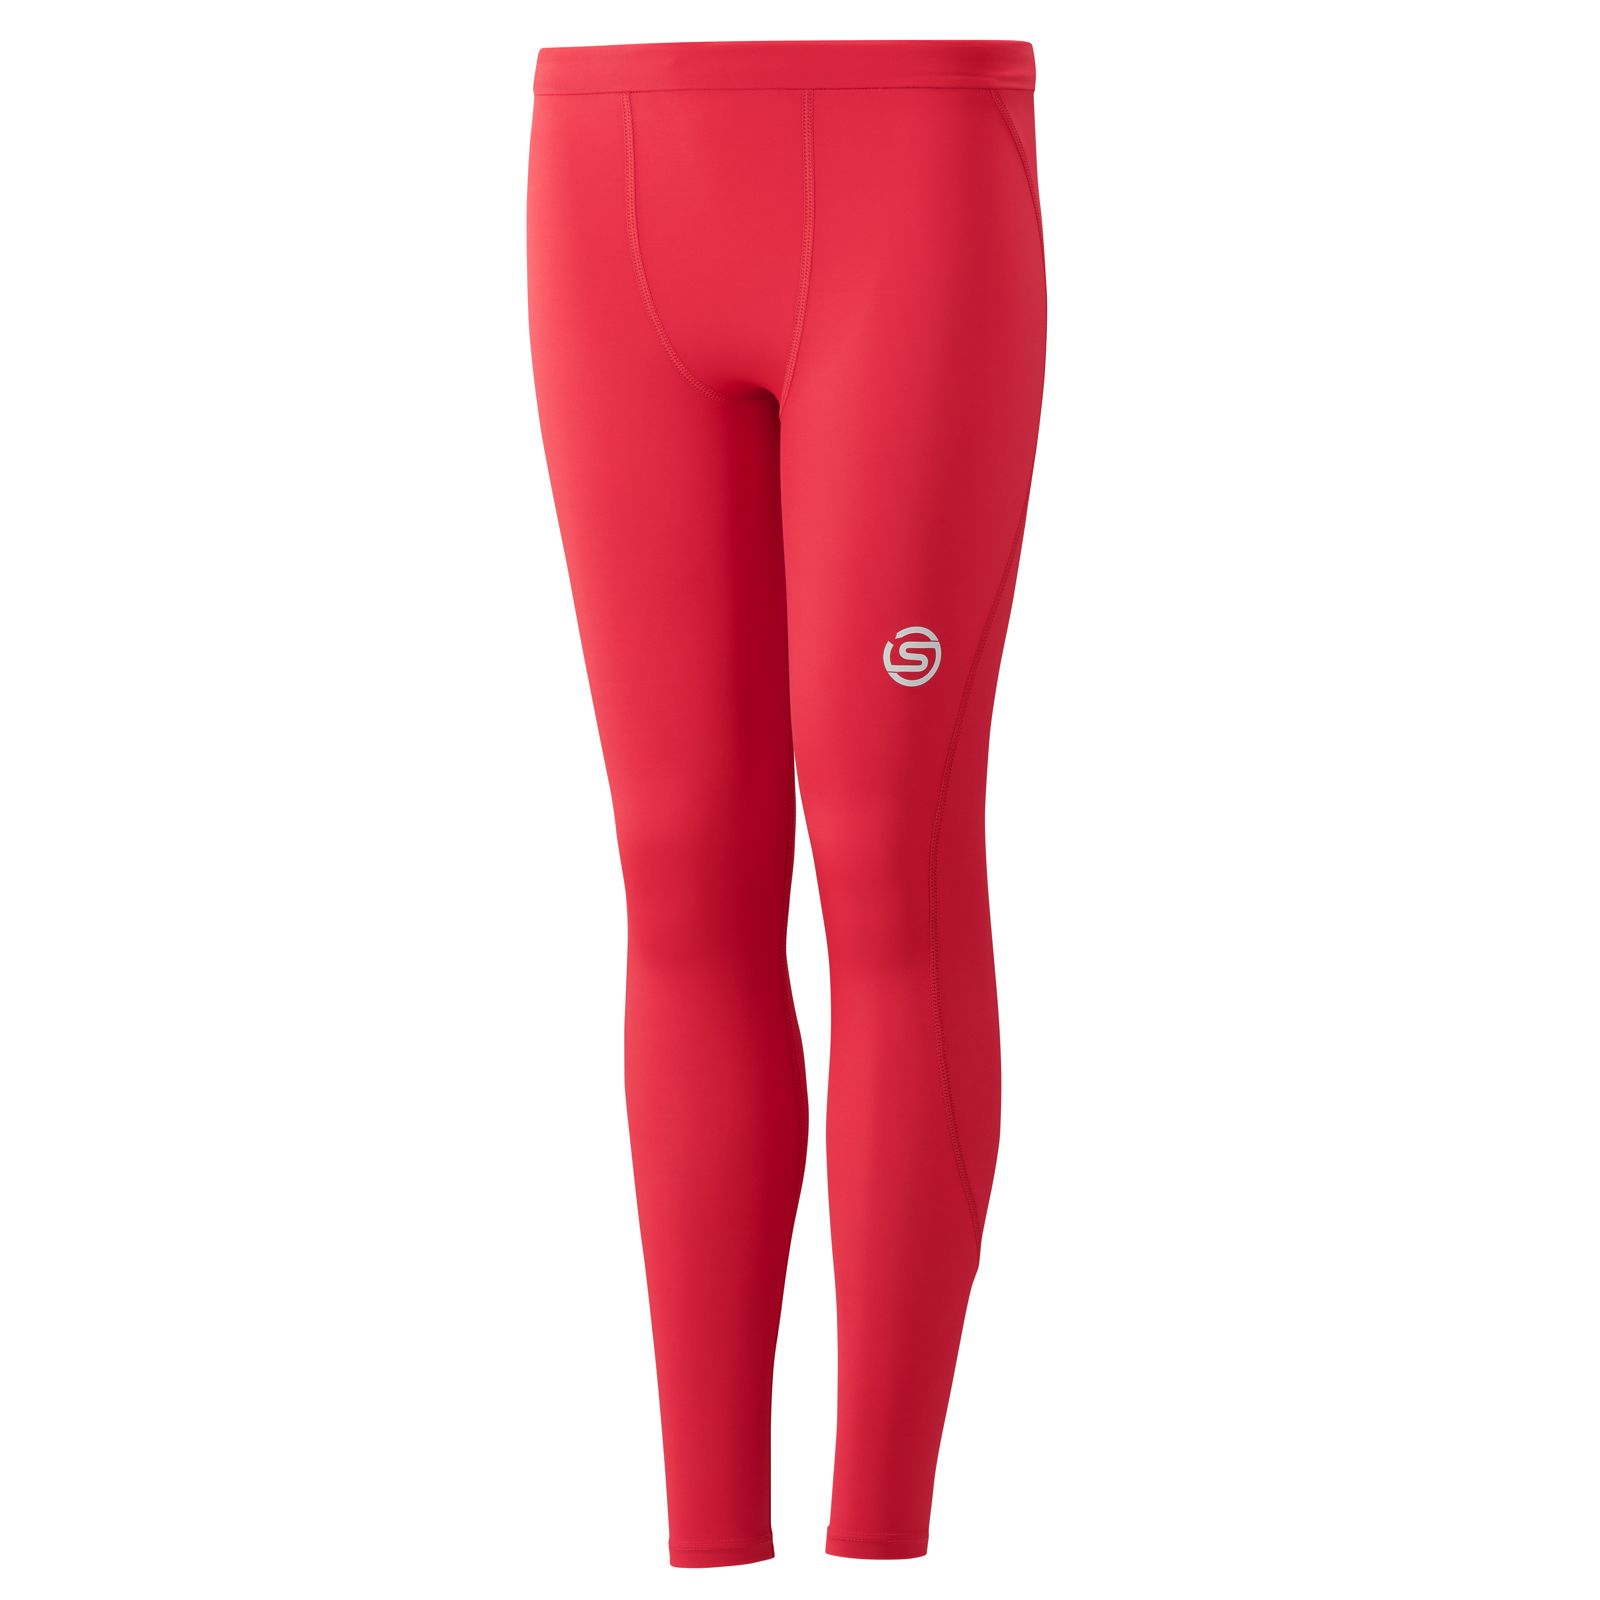 SKINS SERIES-1 YOUTH LONG TIGHTS RED - SKINS Compression EU